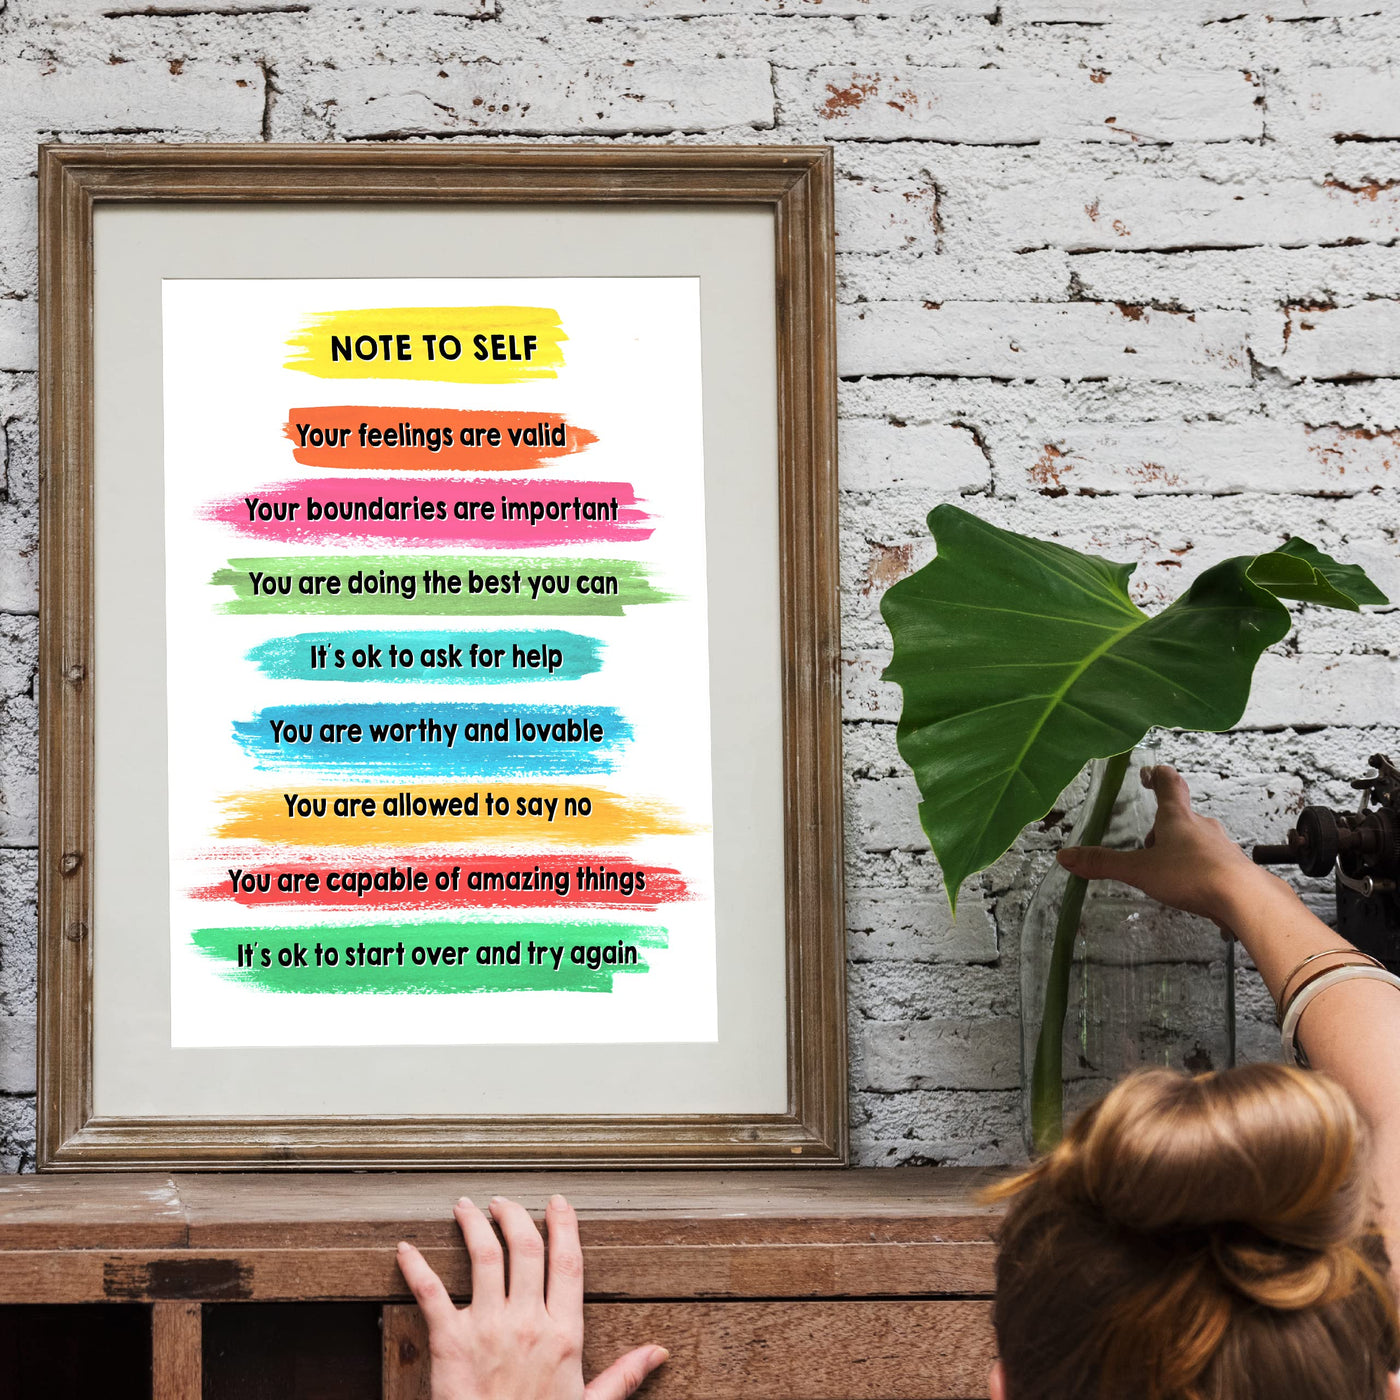 Note to Self -You Are Worthy Inspirational Quotes Wall Art -11 x 14" Paint Brush Stroke Print -Ready to Frame. Motivational Affirmations for Home-Office-Classroom Decor. Great Gift of Inspiration!